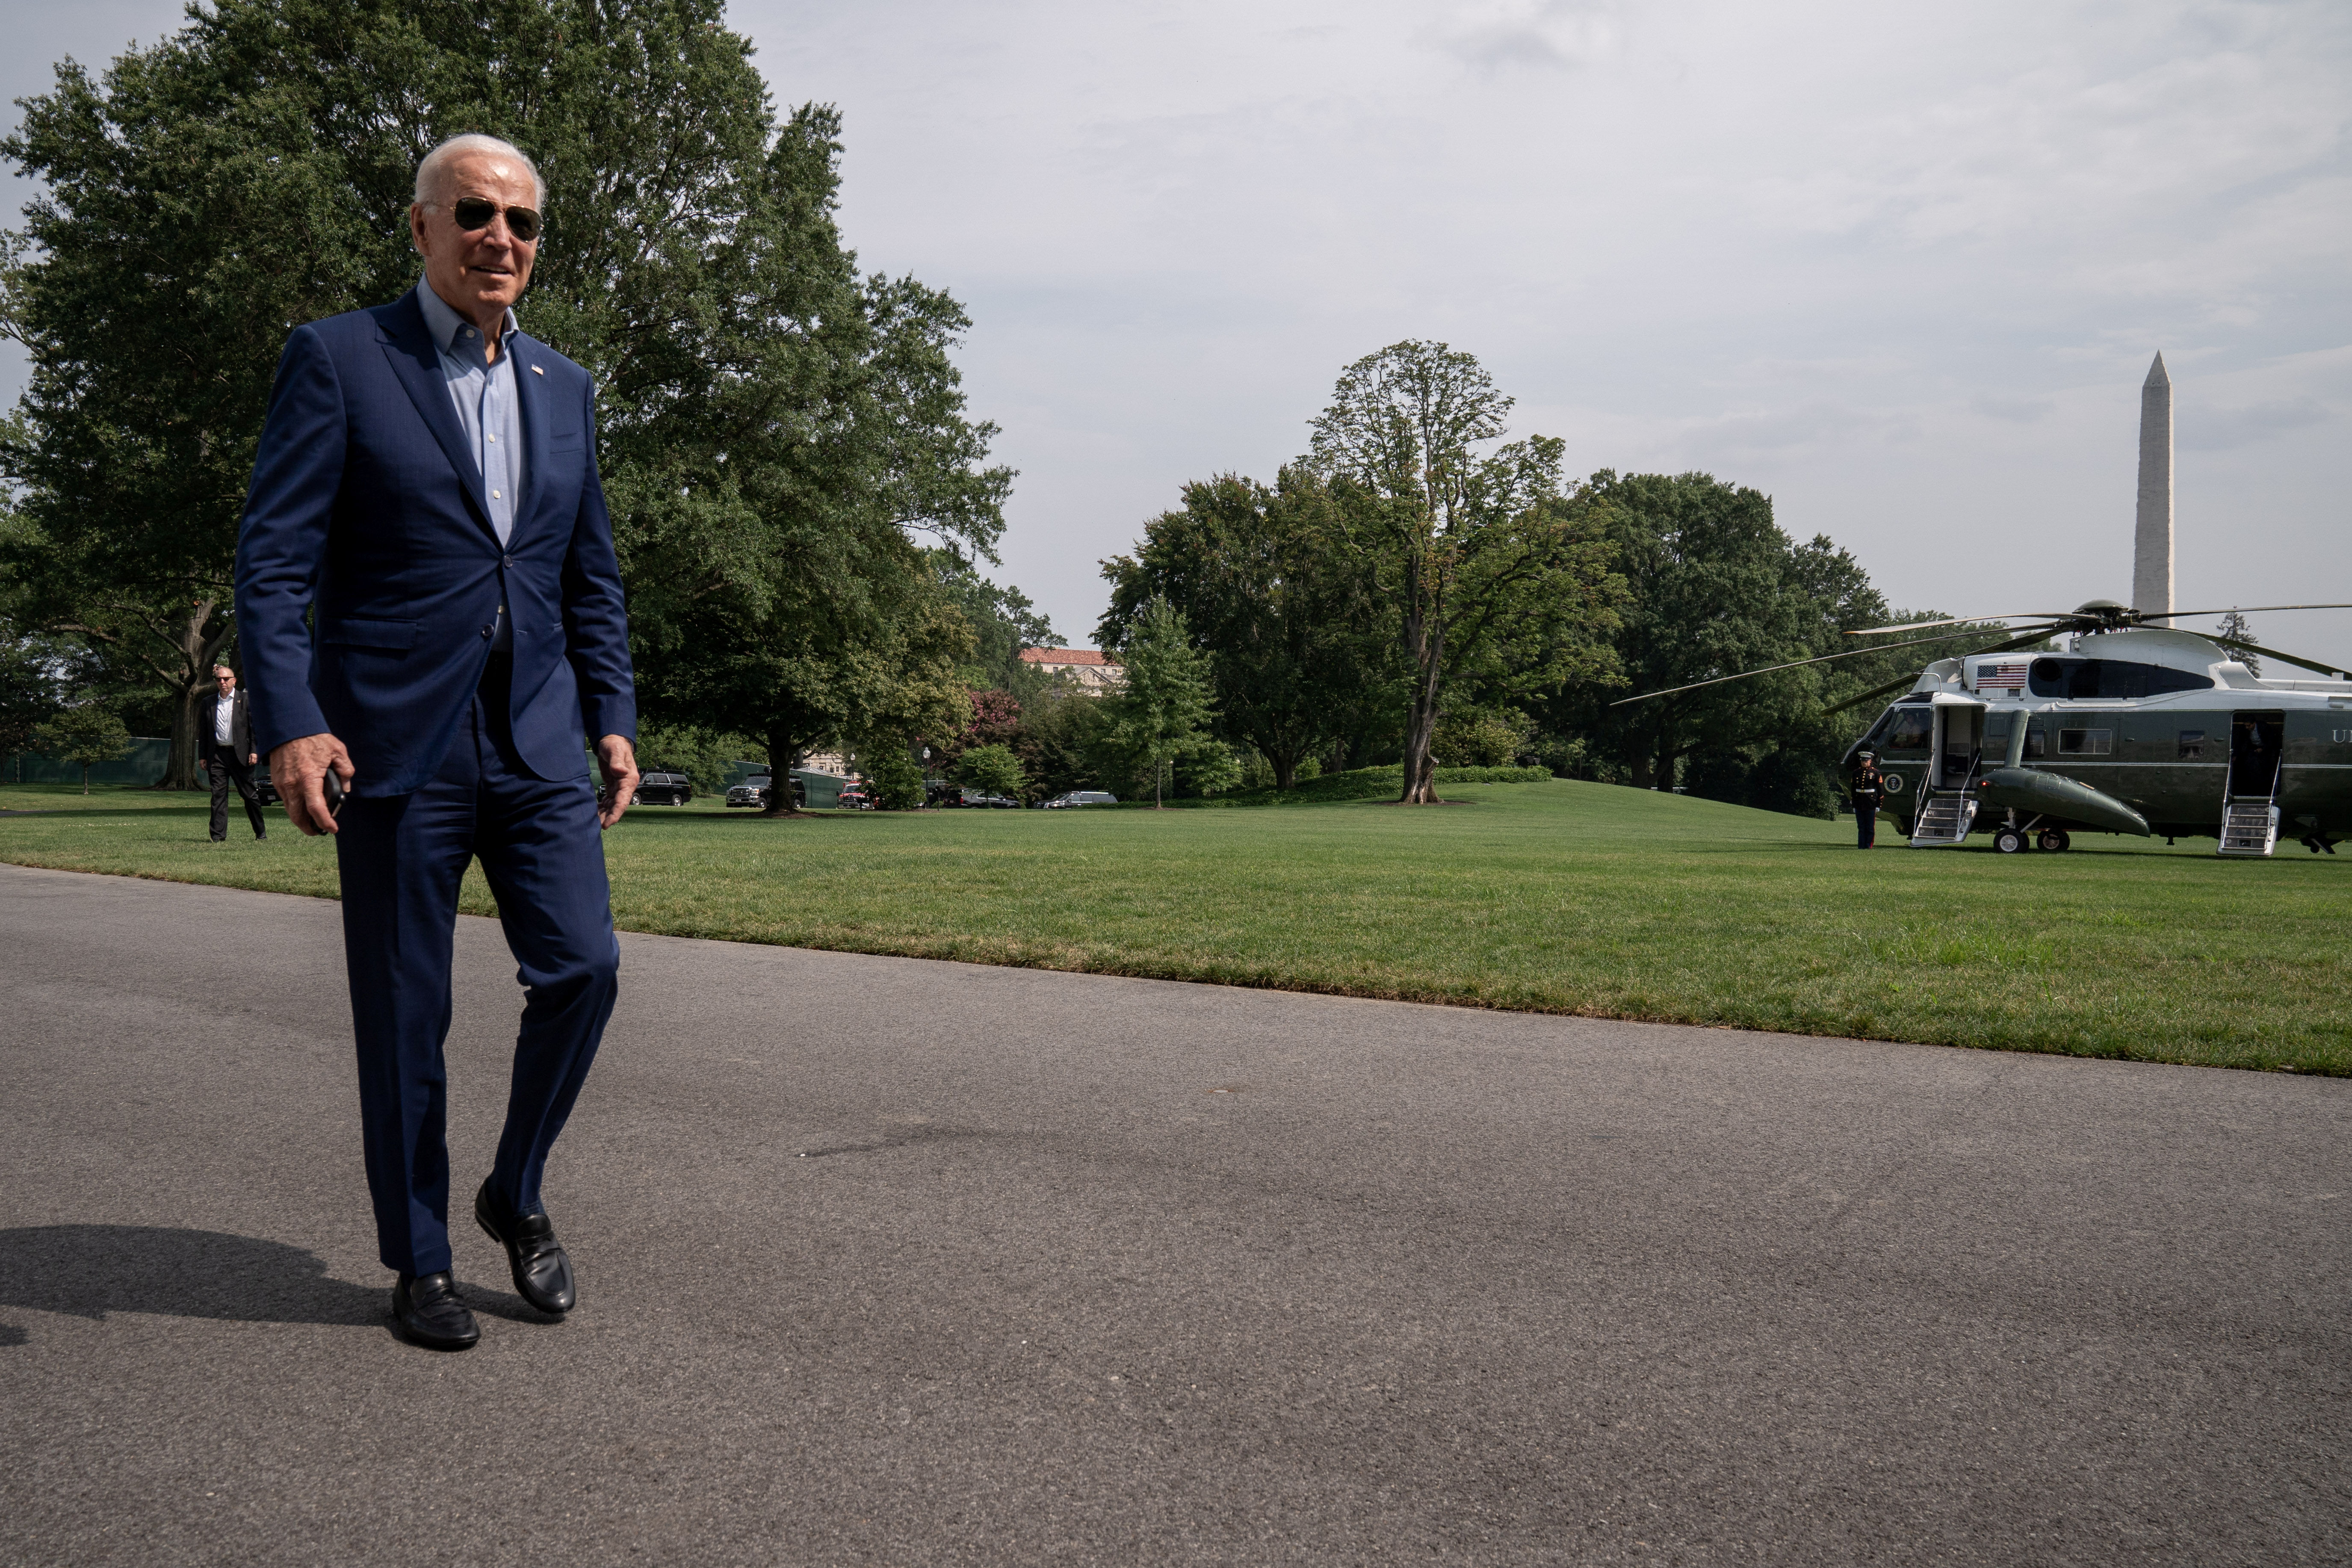 U.S. President Joe Biden walks after exiting Marine One upon his return from Wilmington, Delaware, on the South Lawn at the White House in Washington, U.S., July 25, 2021. REUTERS/Ken Cedeno